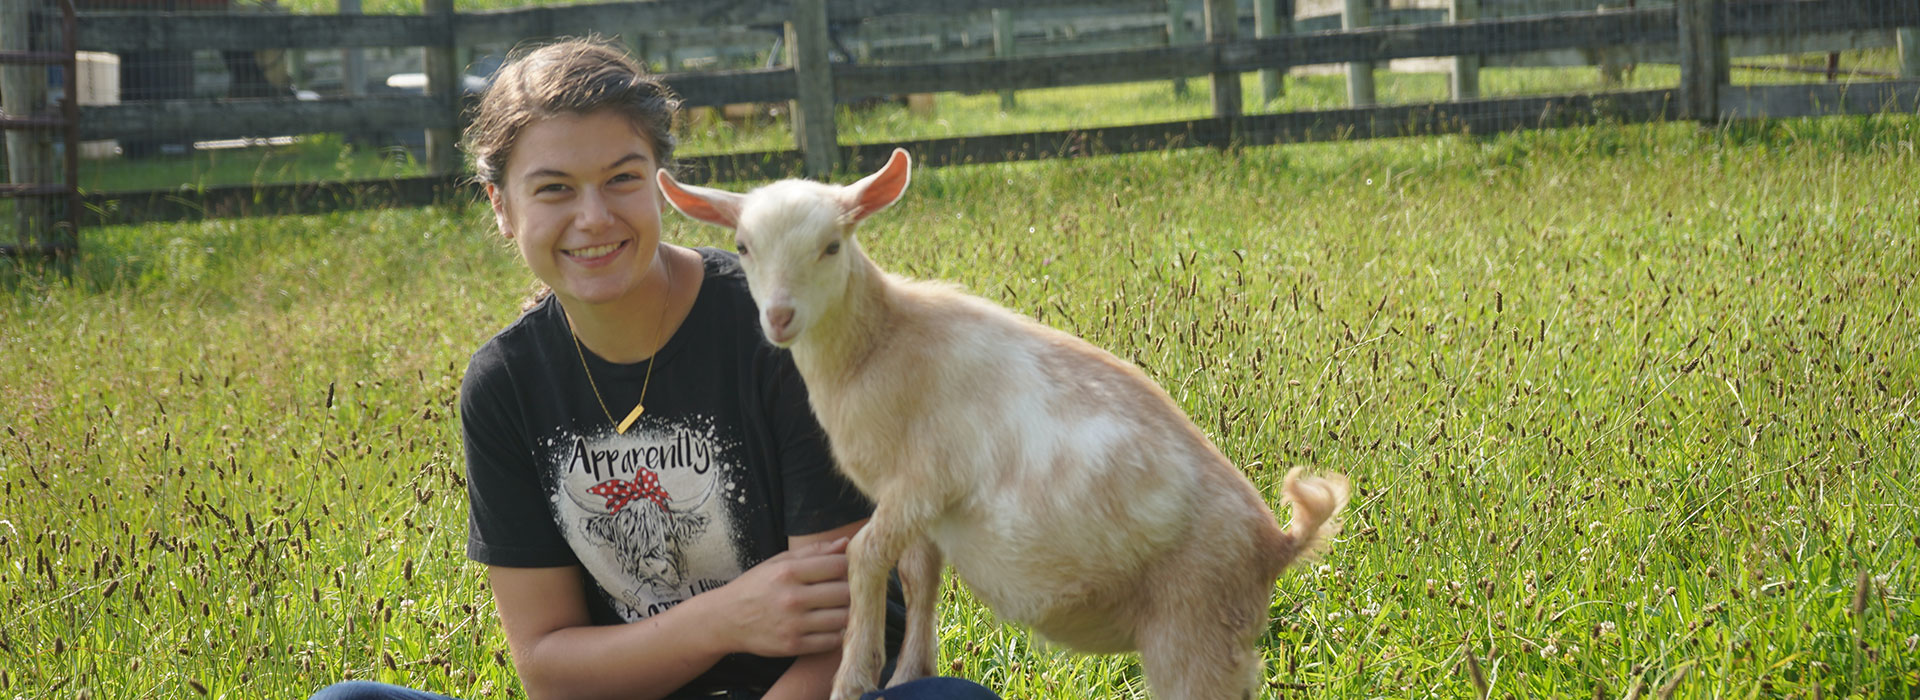 Carrianne Bush and a goat at the SUNY Morrisville livestock barn